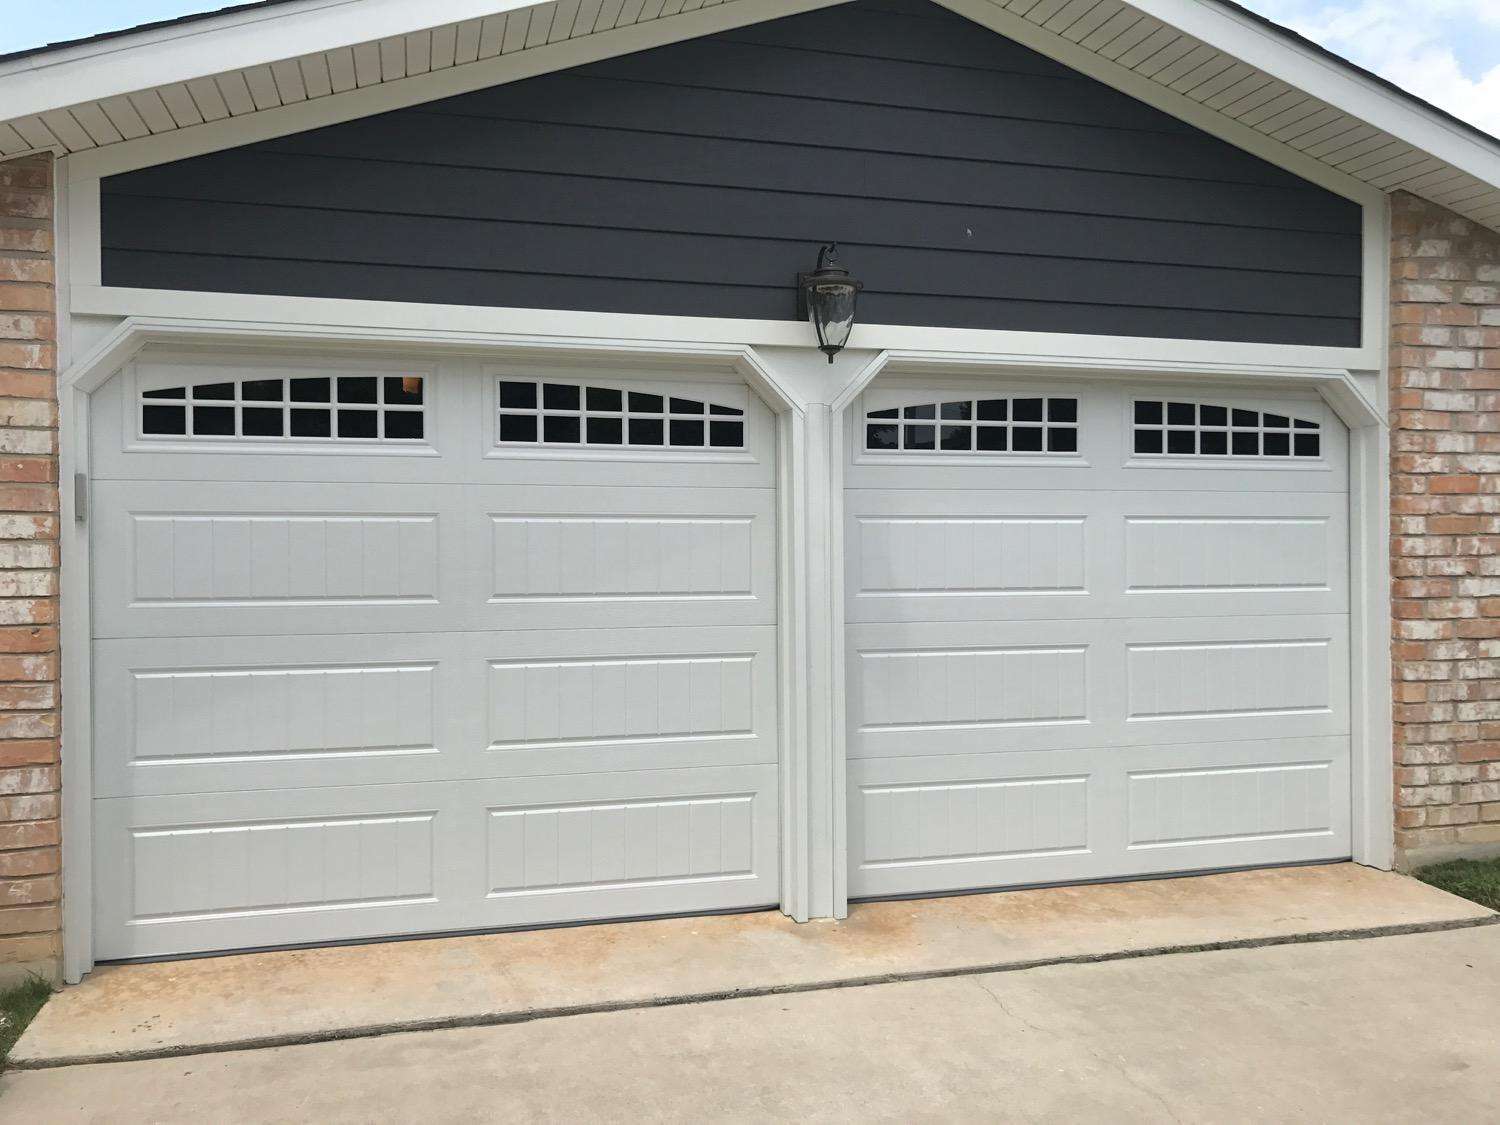 Long stamped carriage garage doors with moonlight windows.